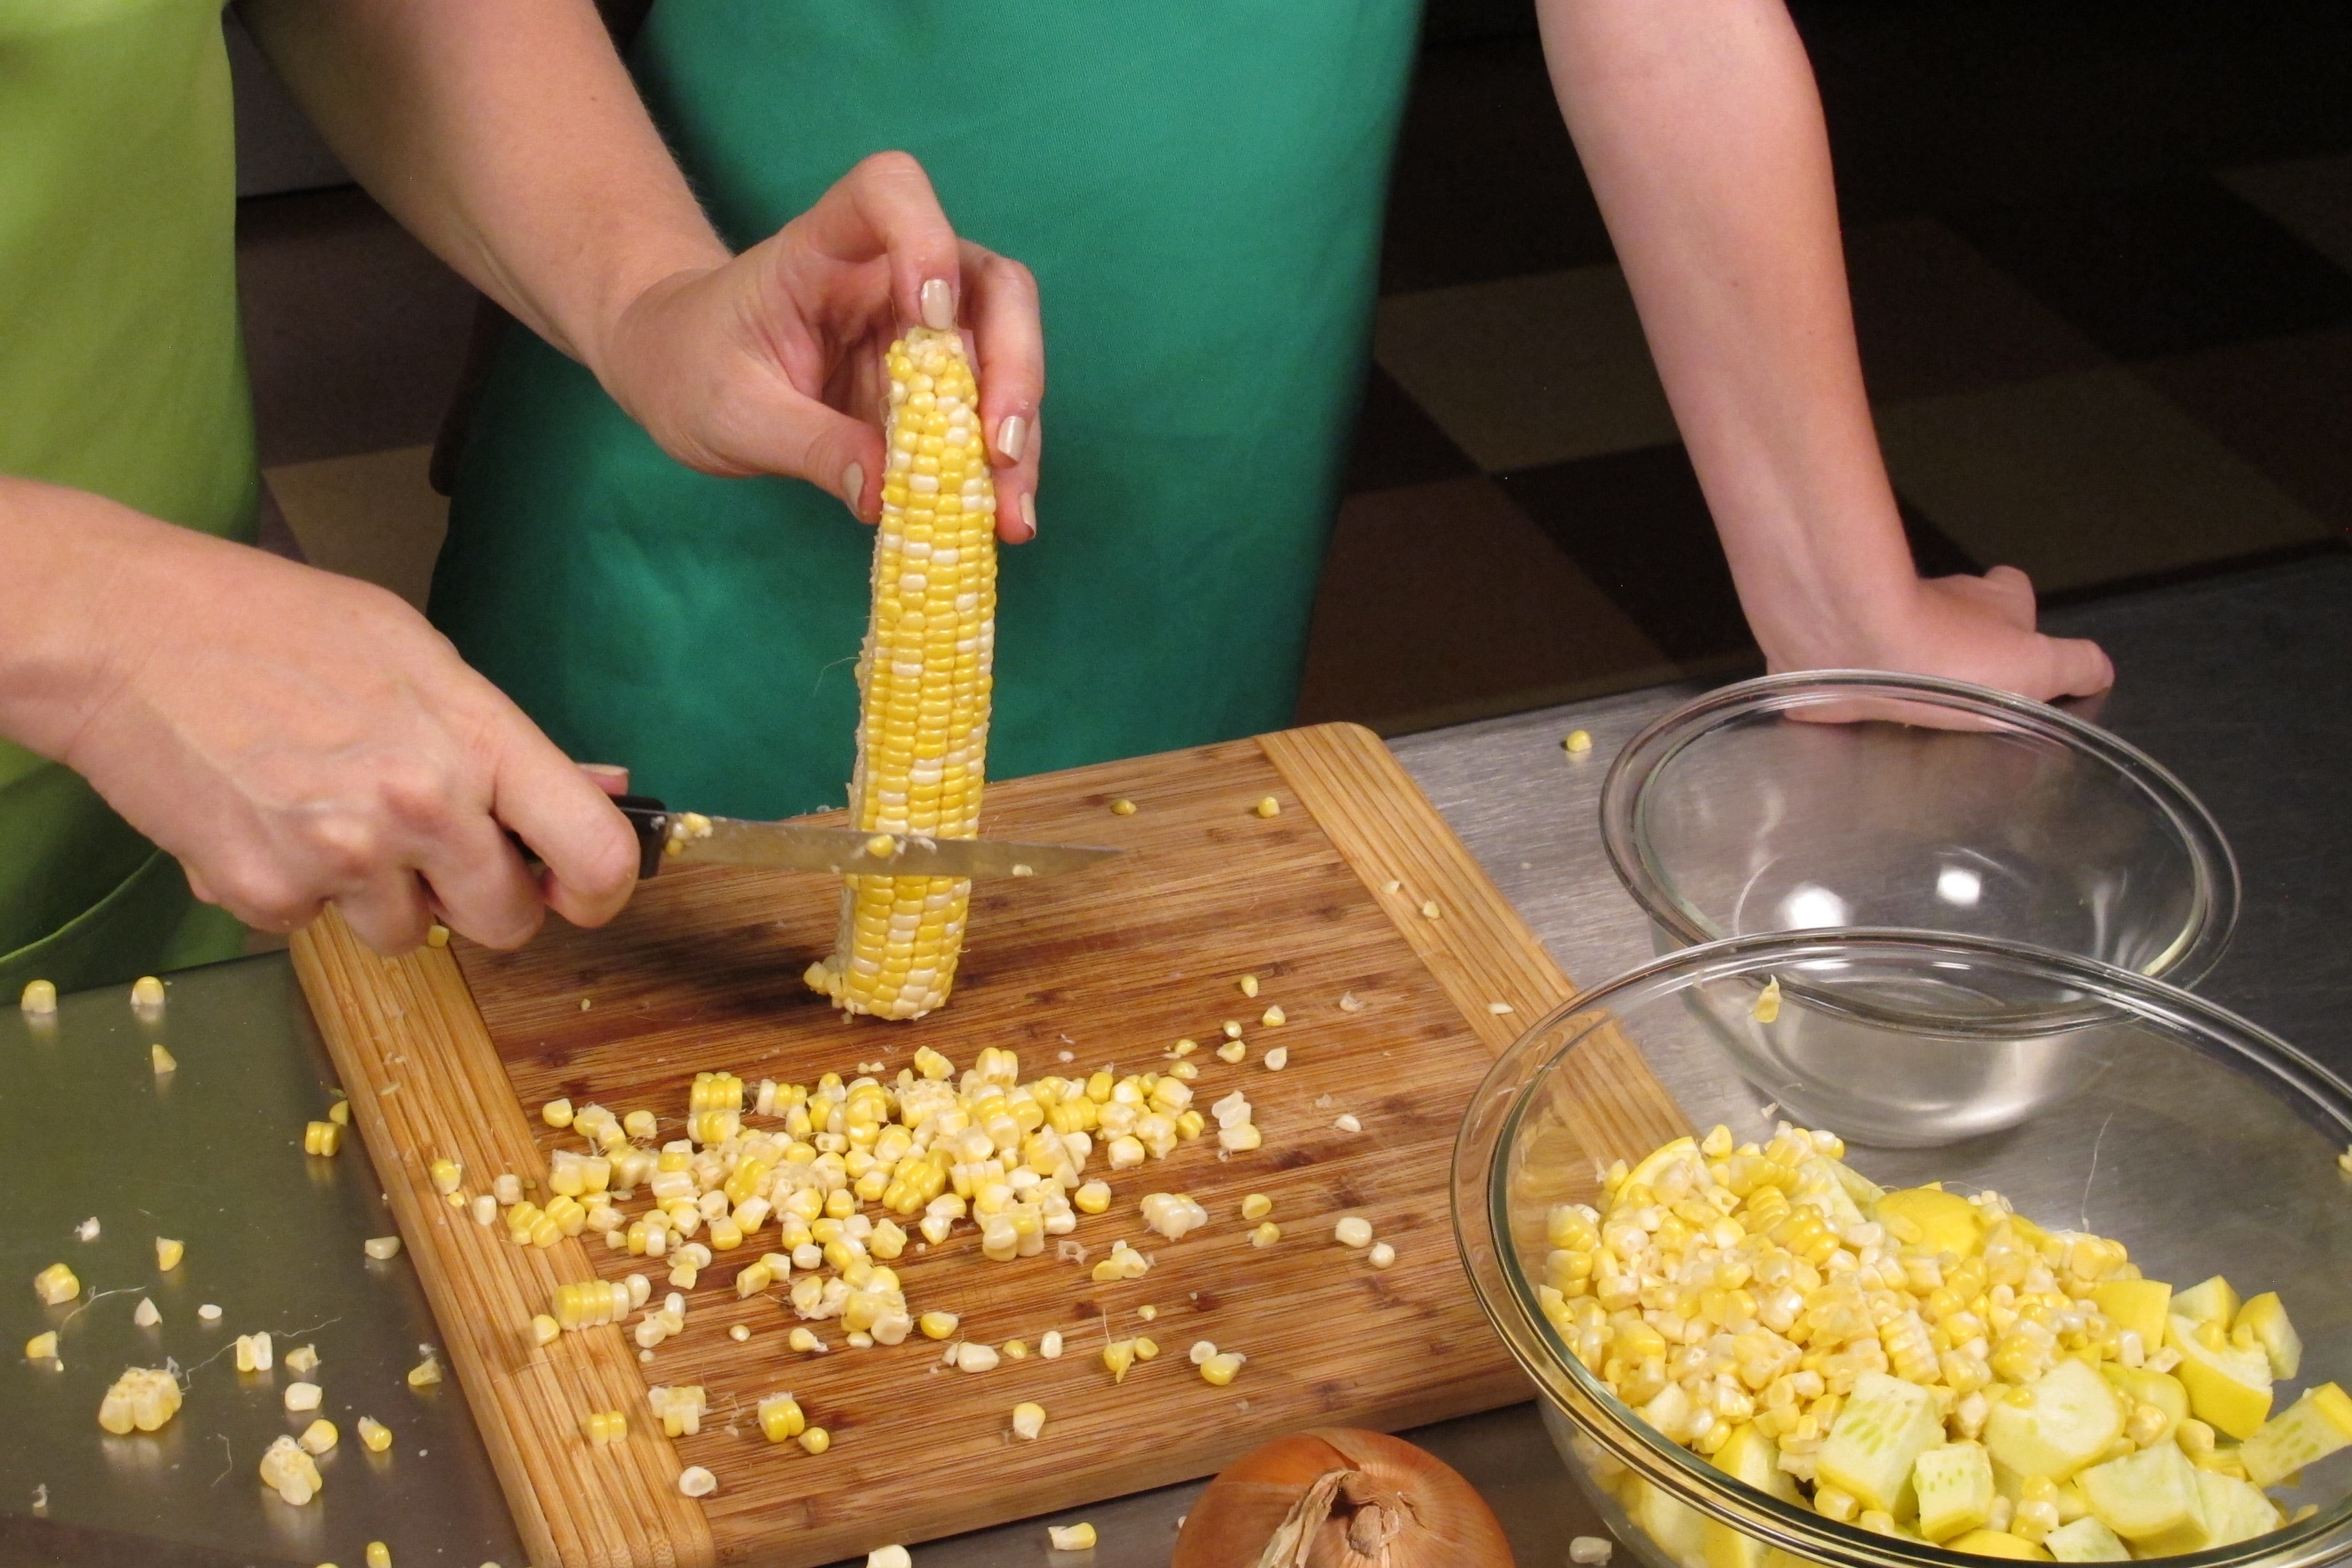 If using fresh corn-on-the-cob, have an adult or experienced slicer remove the kernels.